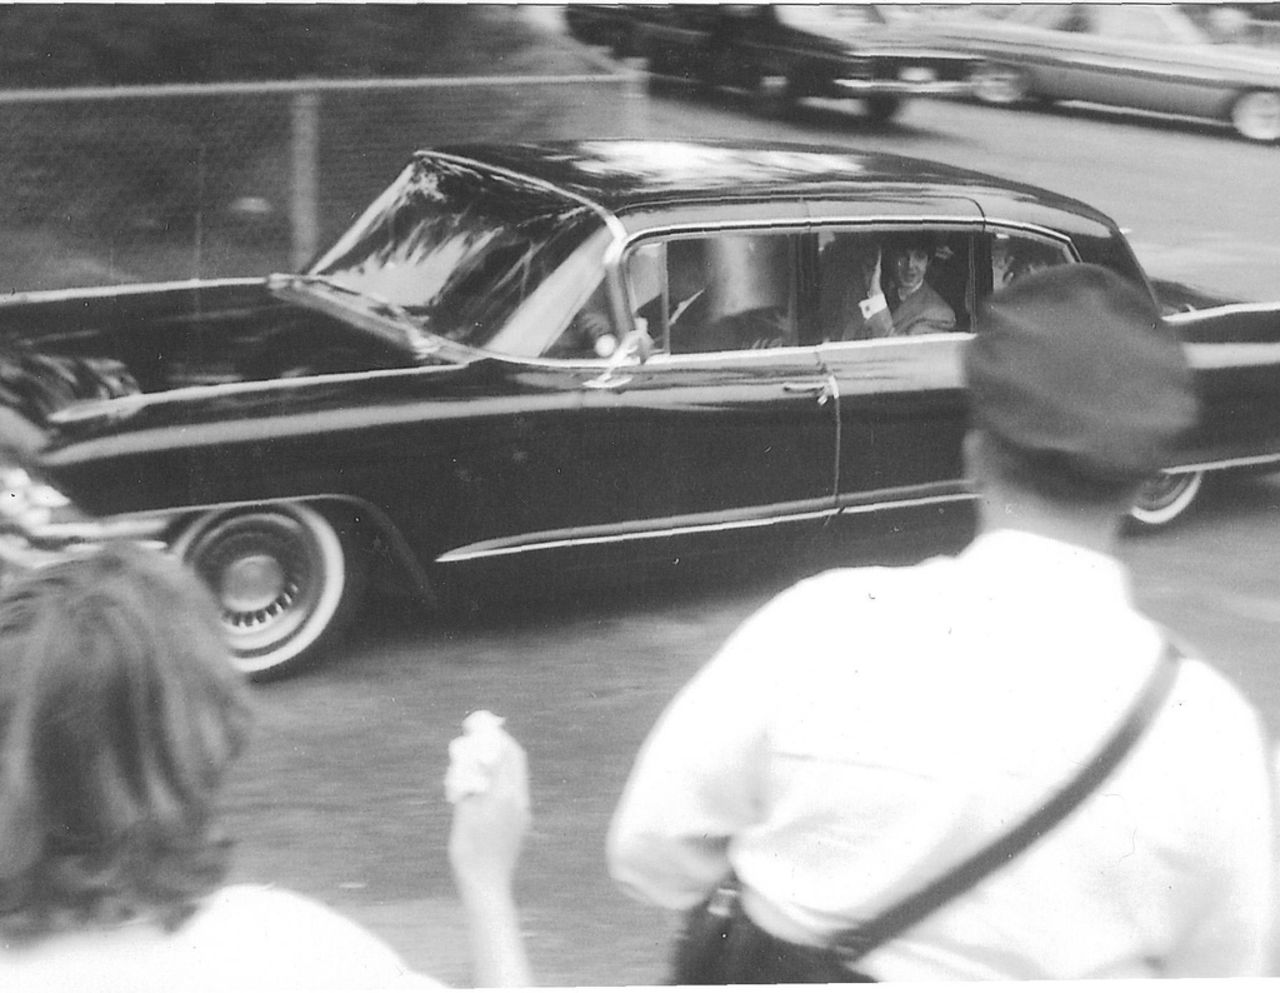 James snapped this photo of Paul McCartney driving by in August 1964 while visiting her brother in Detroit. "I heard screaming and learned that The Beatles were staying at a nearby hotel," she said. "I took off and hung around the hotel driveway and was lucky enough to get that photo." James recalls a girl fainting right in front of her -- a common sight during the height of Beatlemania.